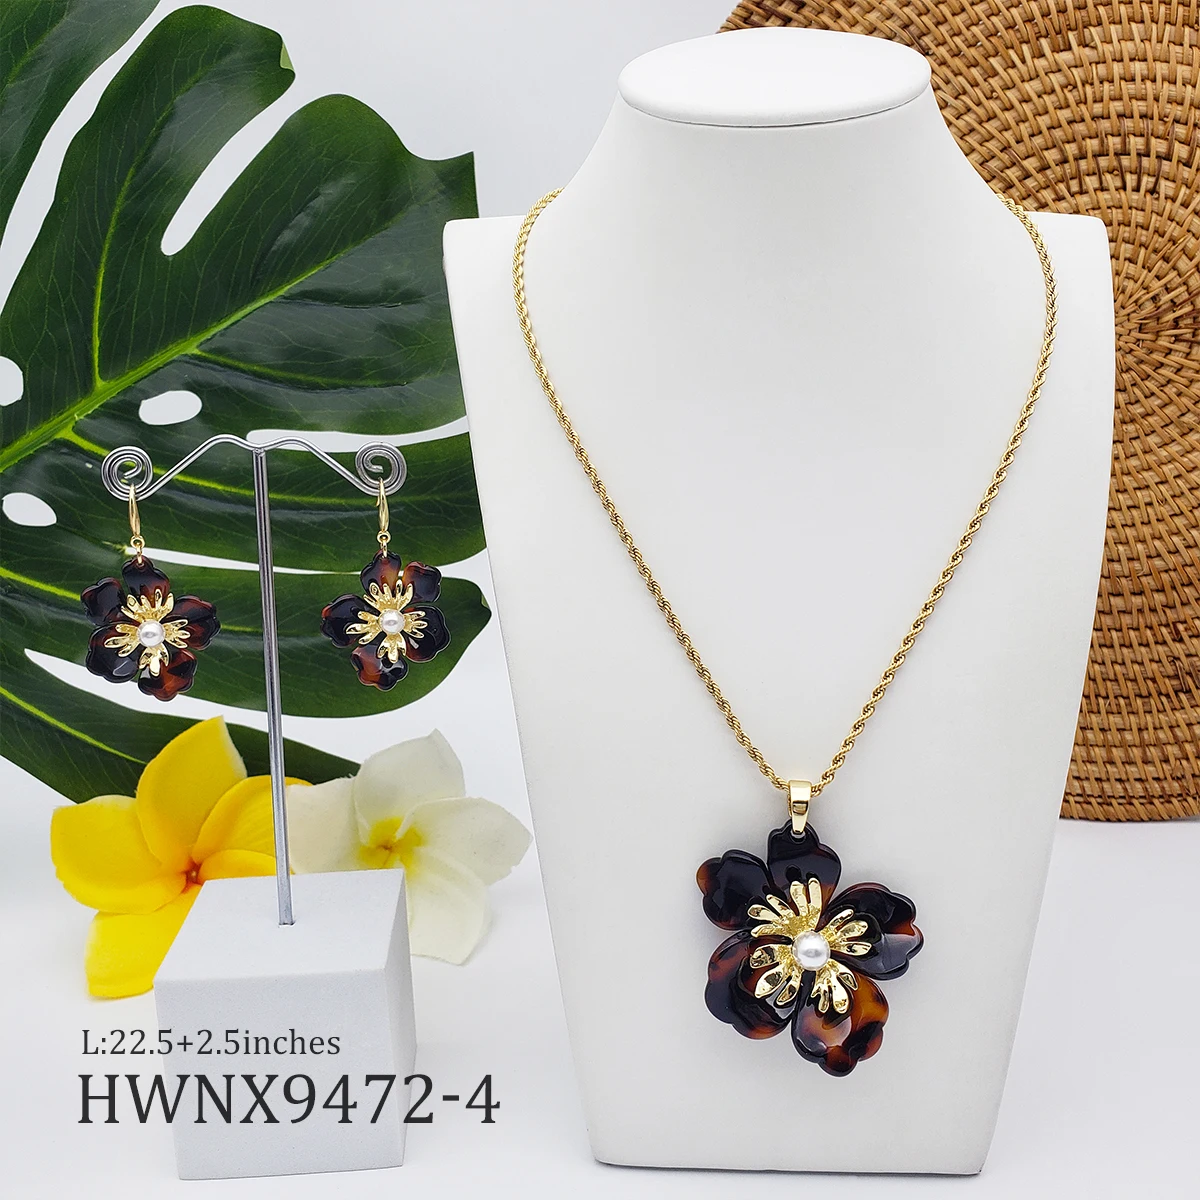 

Wholesale Hawaiian Jewelry Ready Stock Fast Delivery Acrylic Turtle Shell Flower Earrings Necklace Set For Women